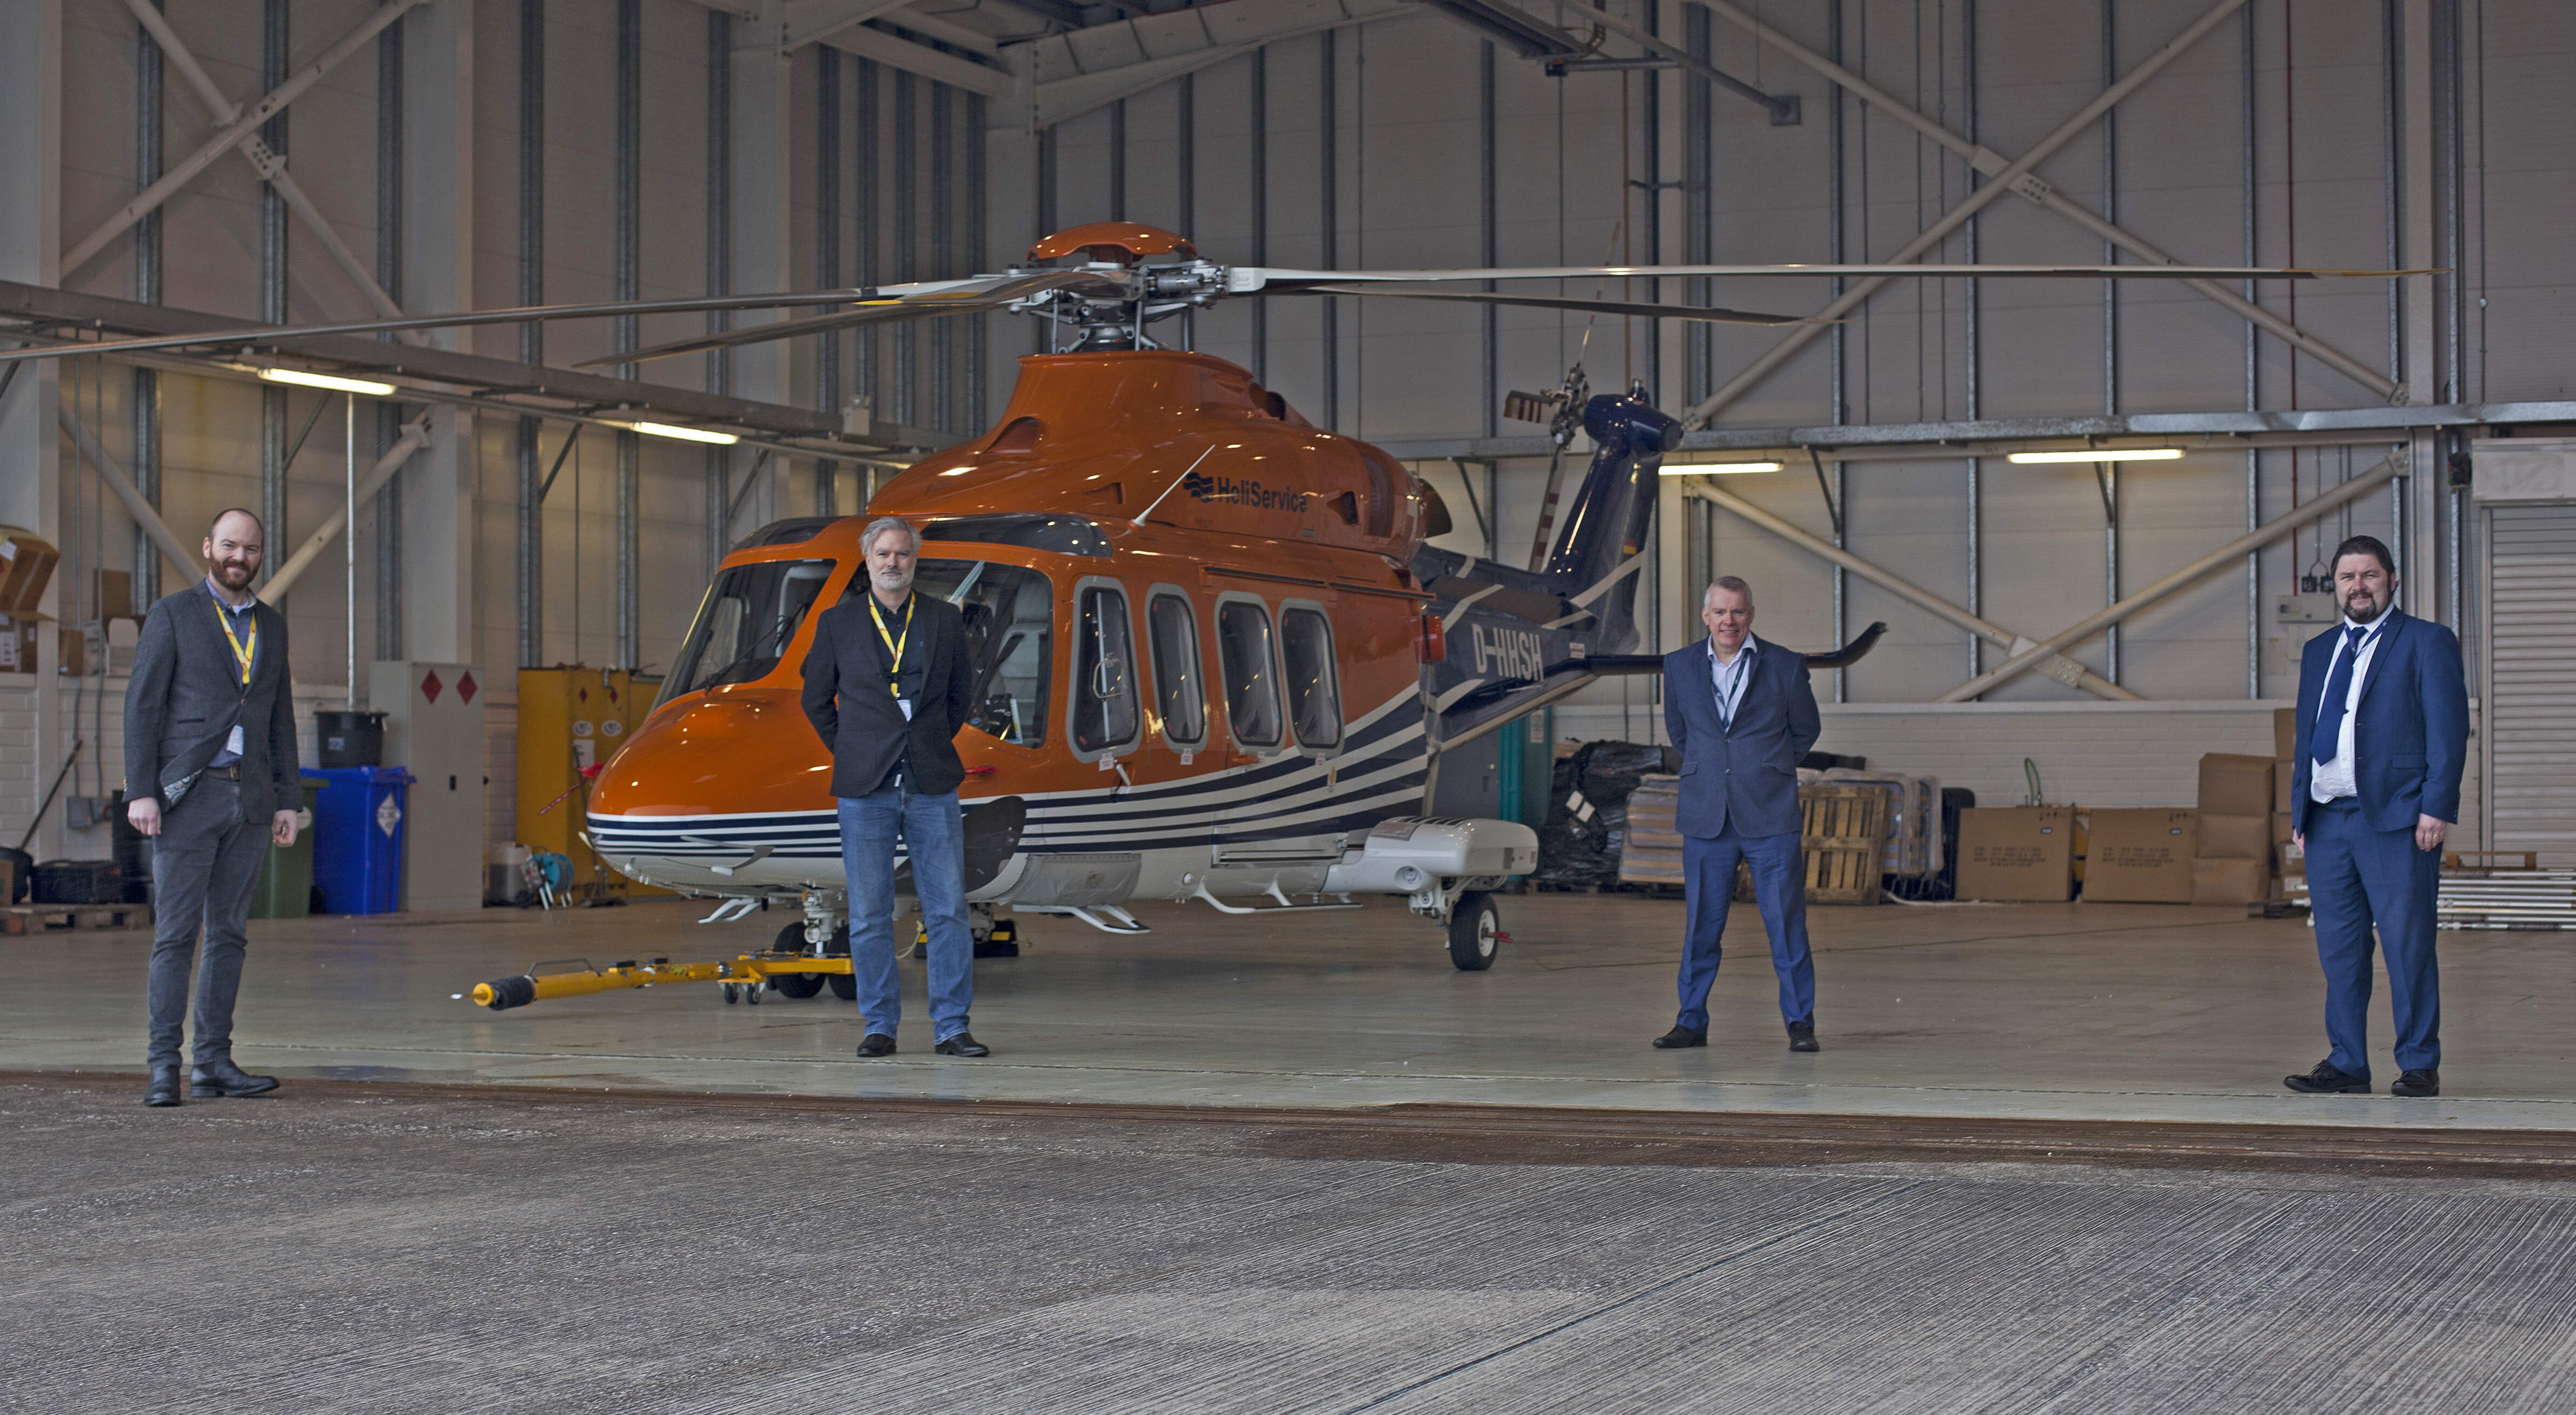 Weston Aviation welcomes NHV Helicopters	to Cork Airport/EICK